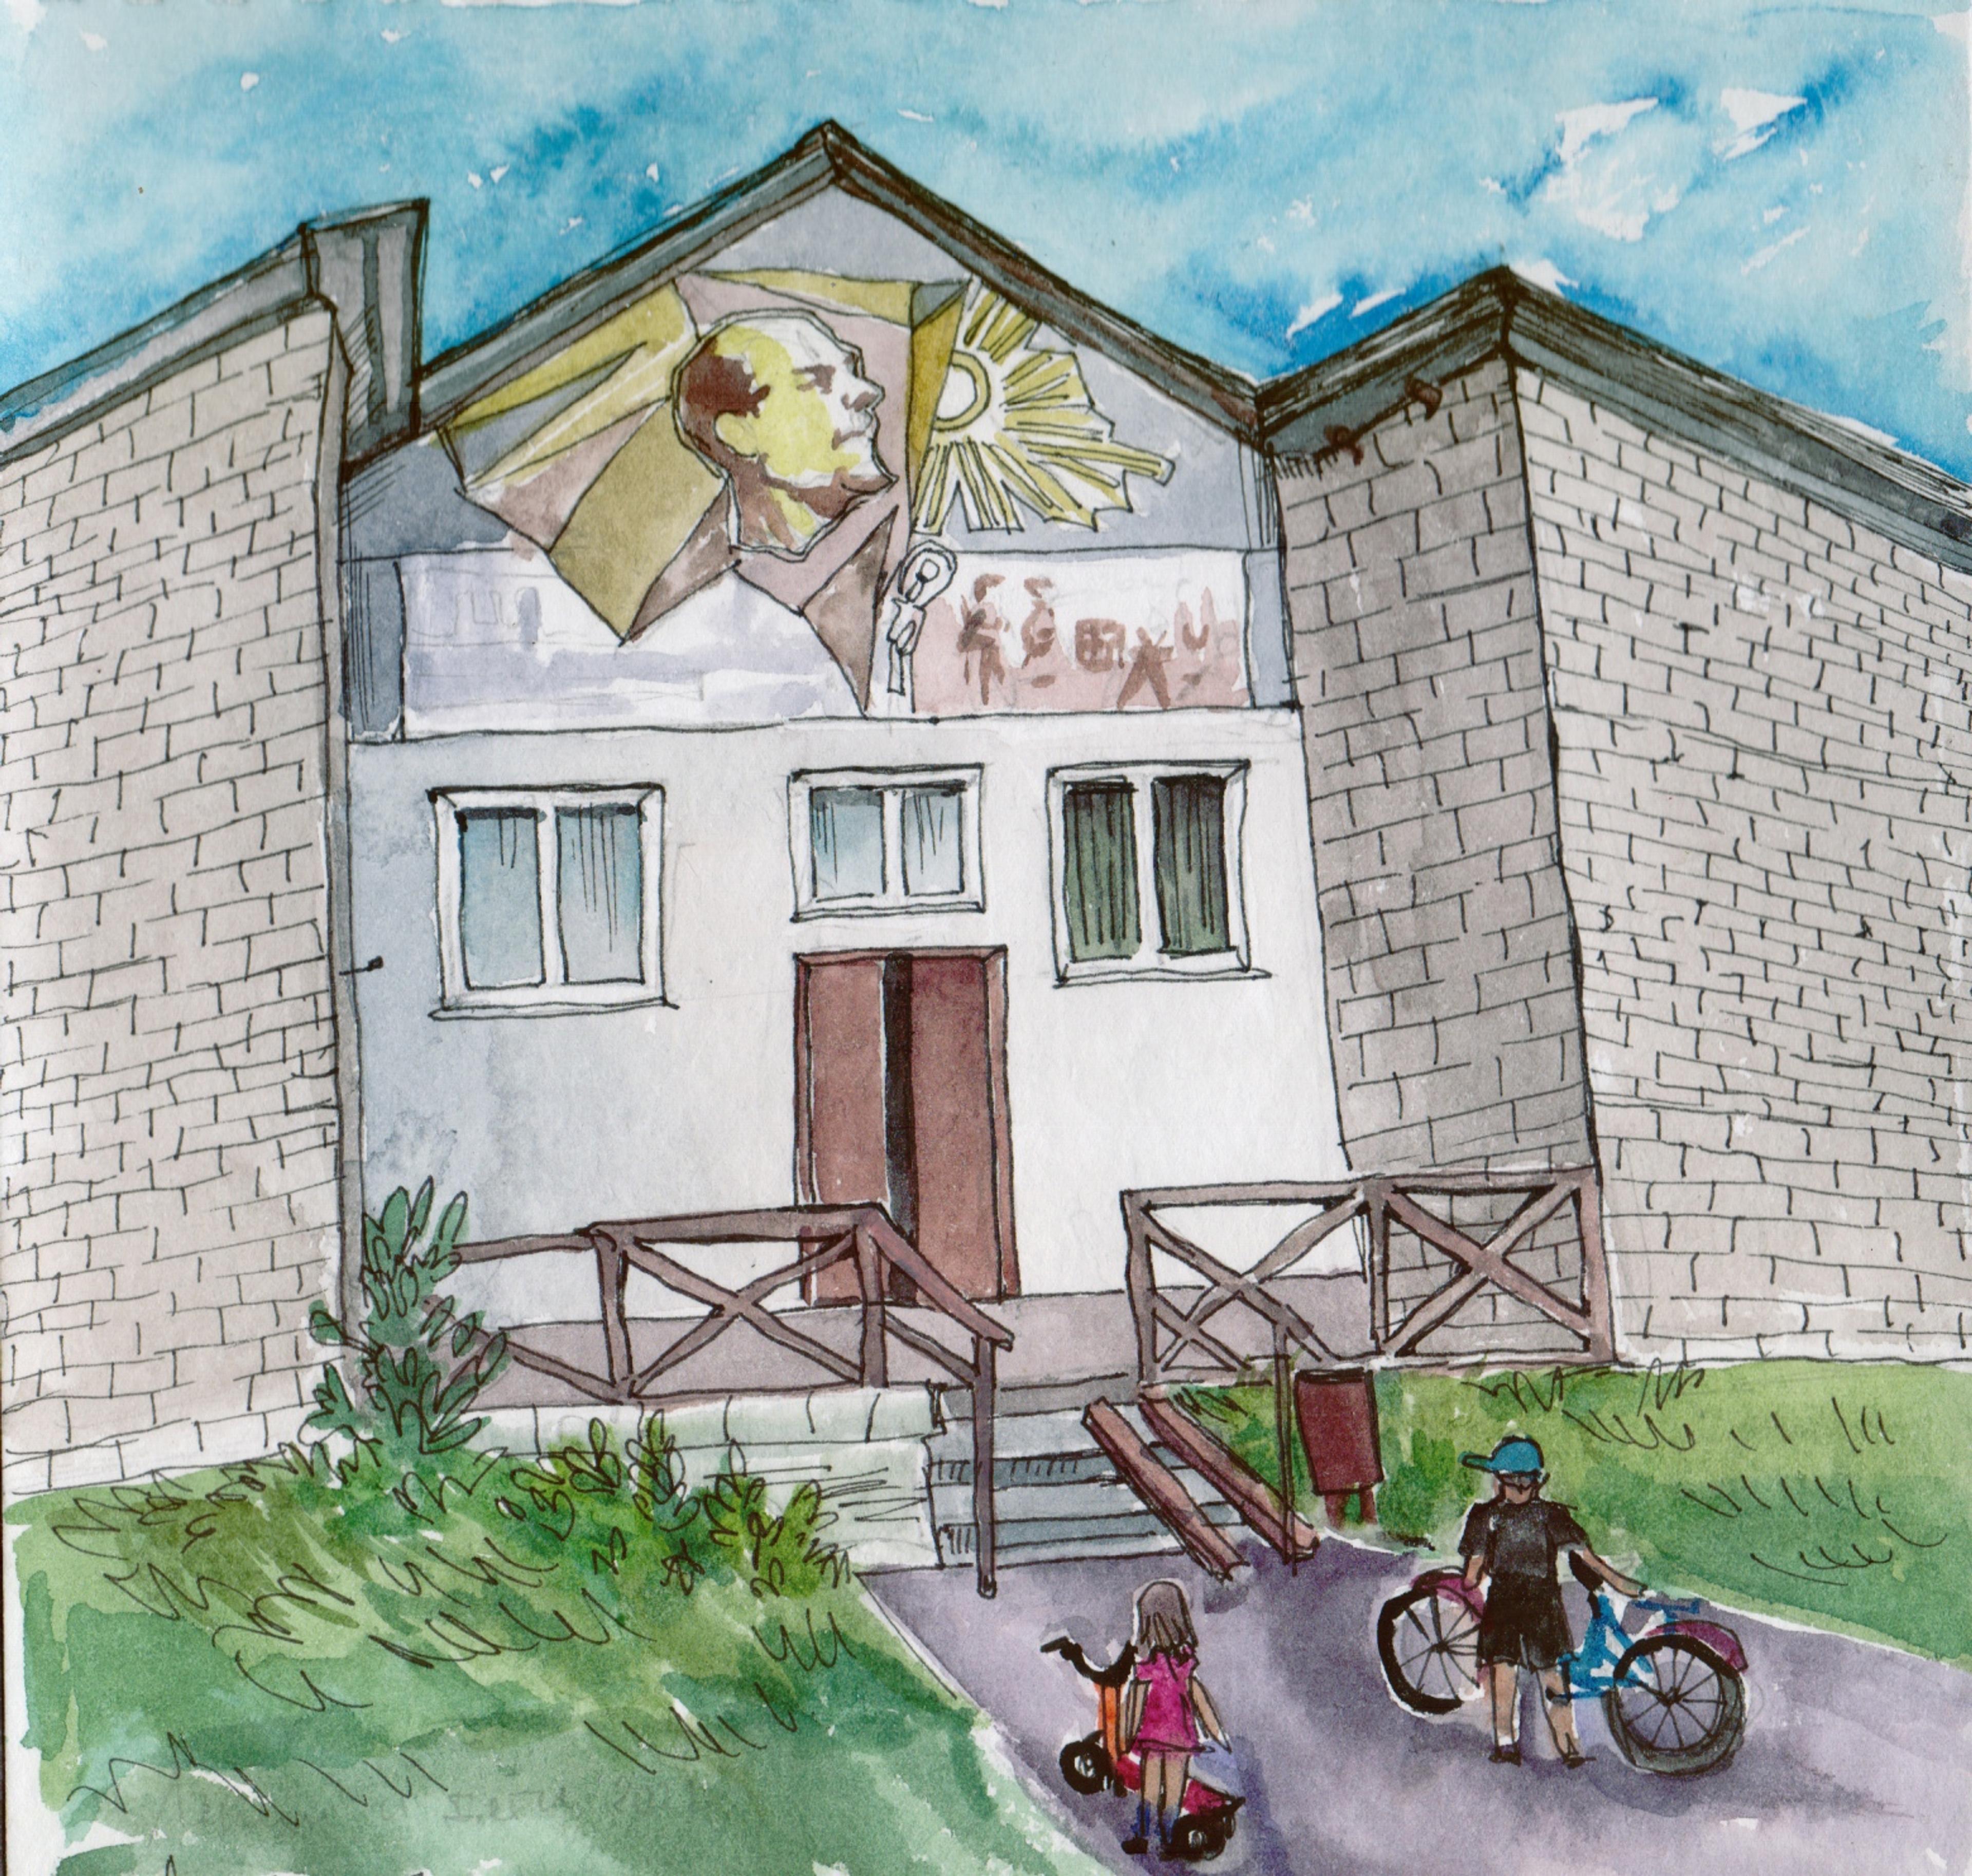 Watercolour painting of the village's cultural centre house and the local kids on bikes in front of it